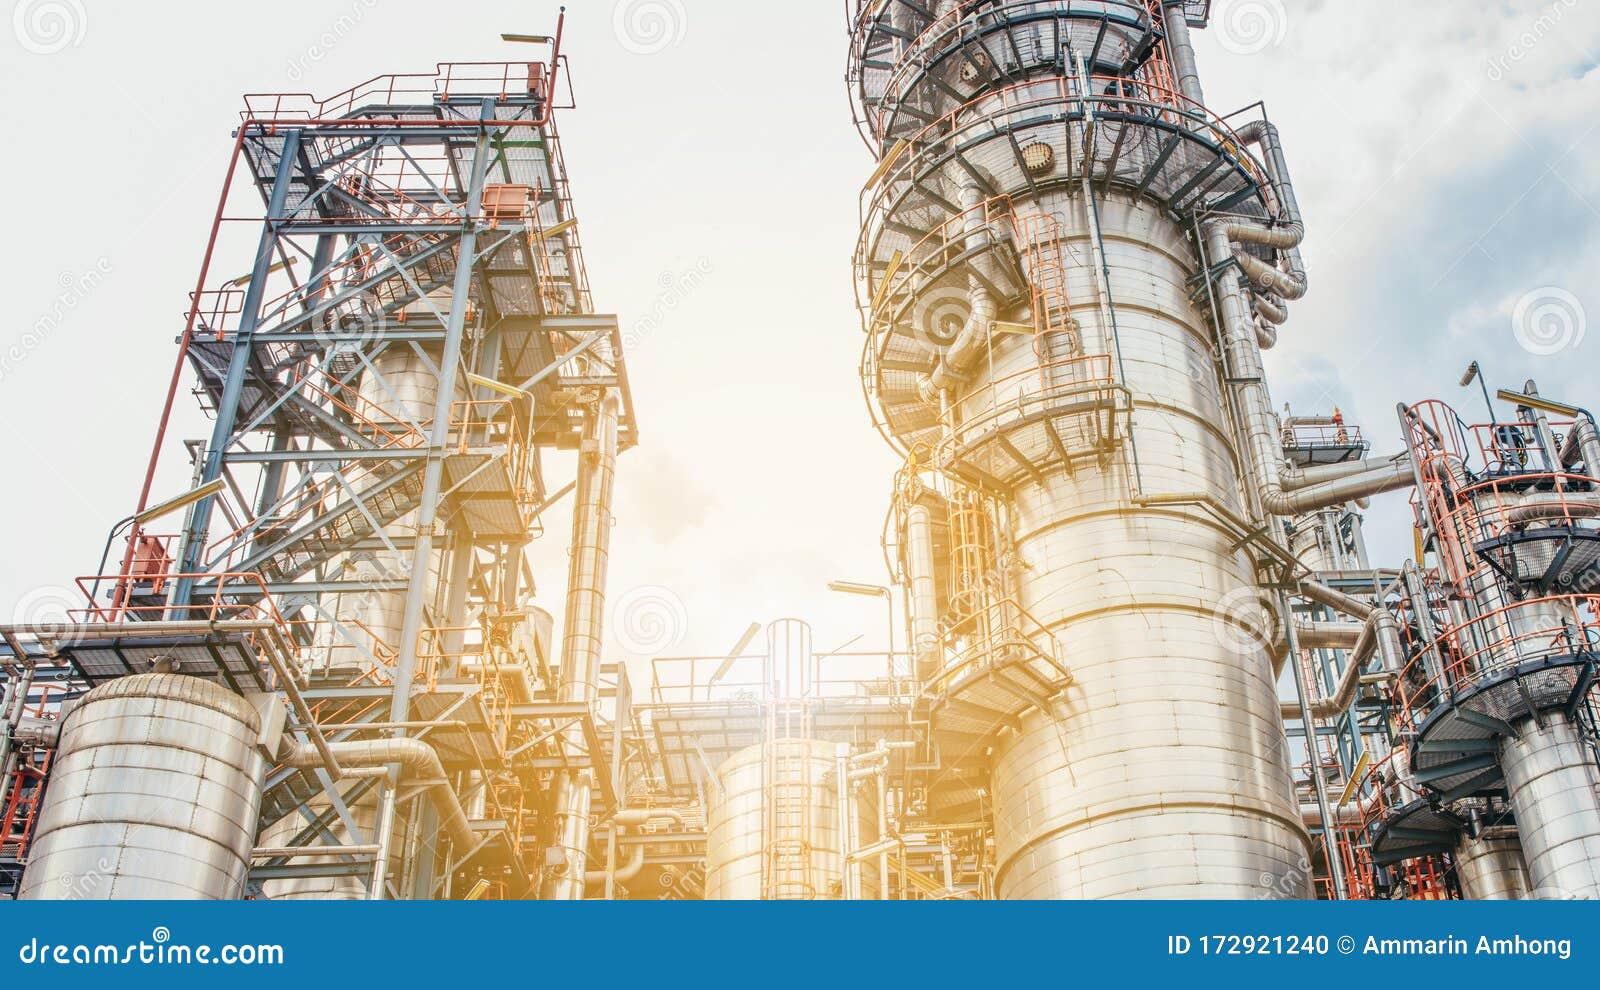 Industrial Zone,The Equipment Of Oil Refining,Close-up Of ...